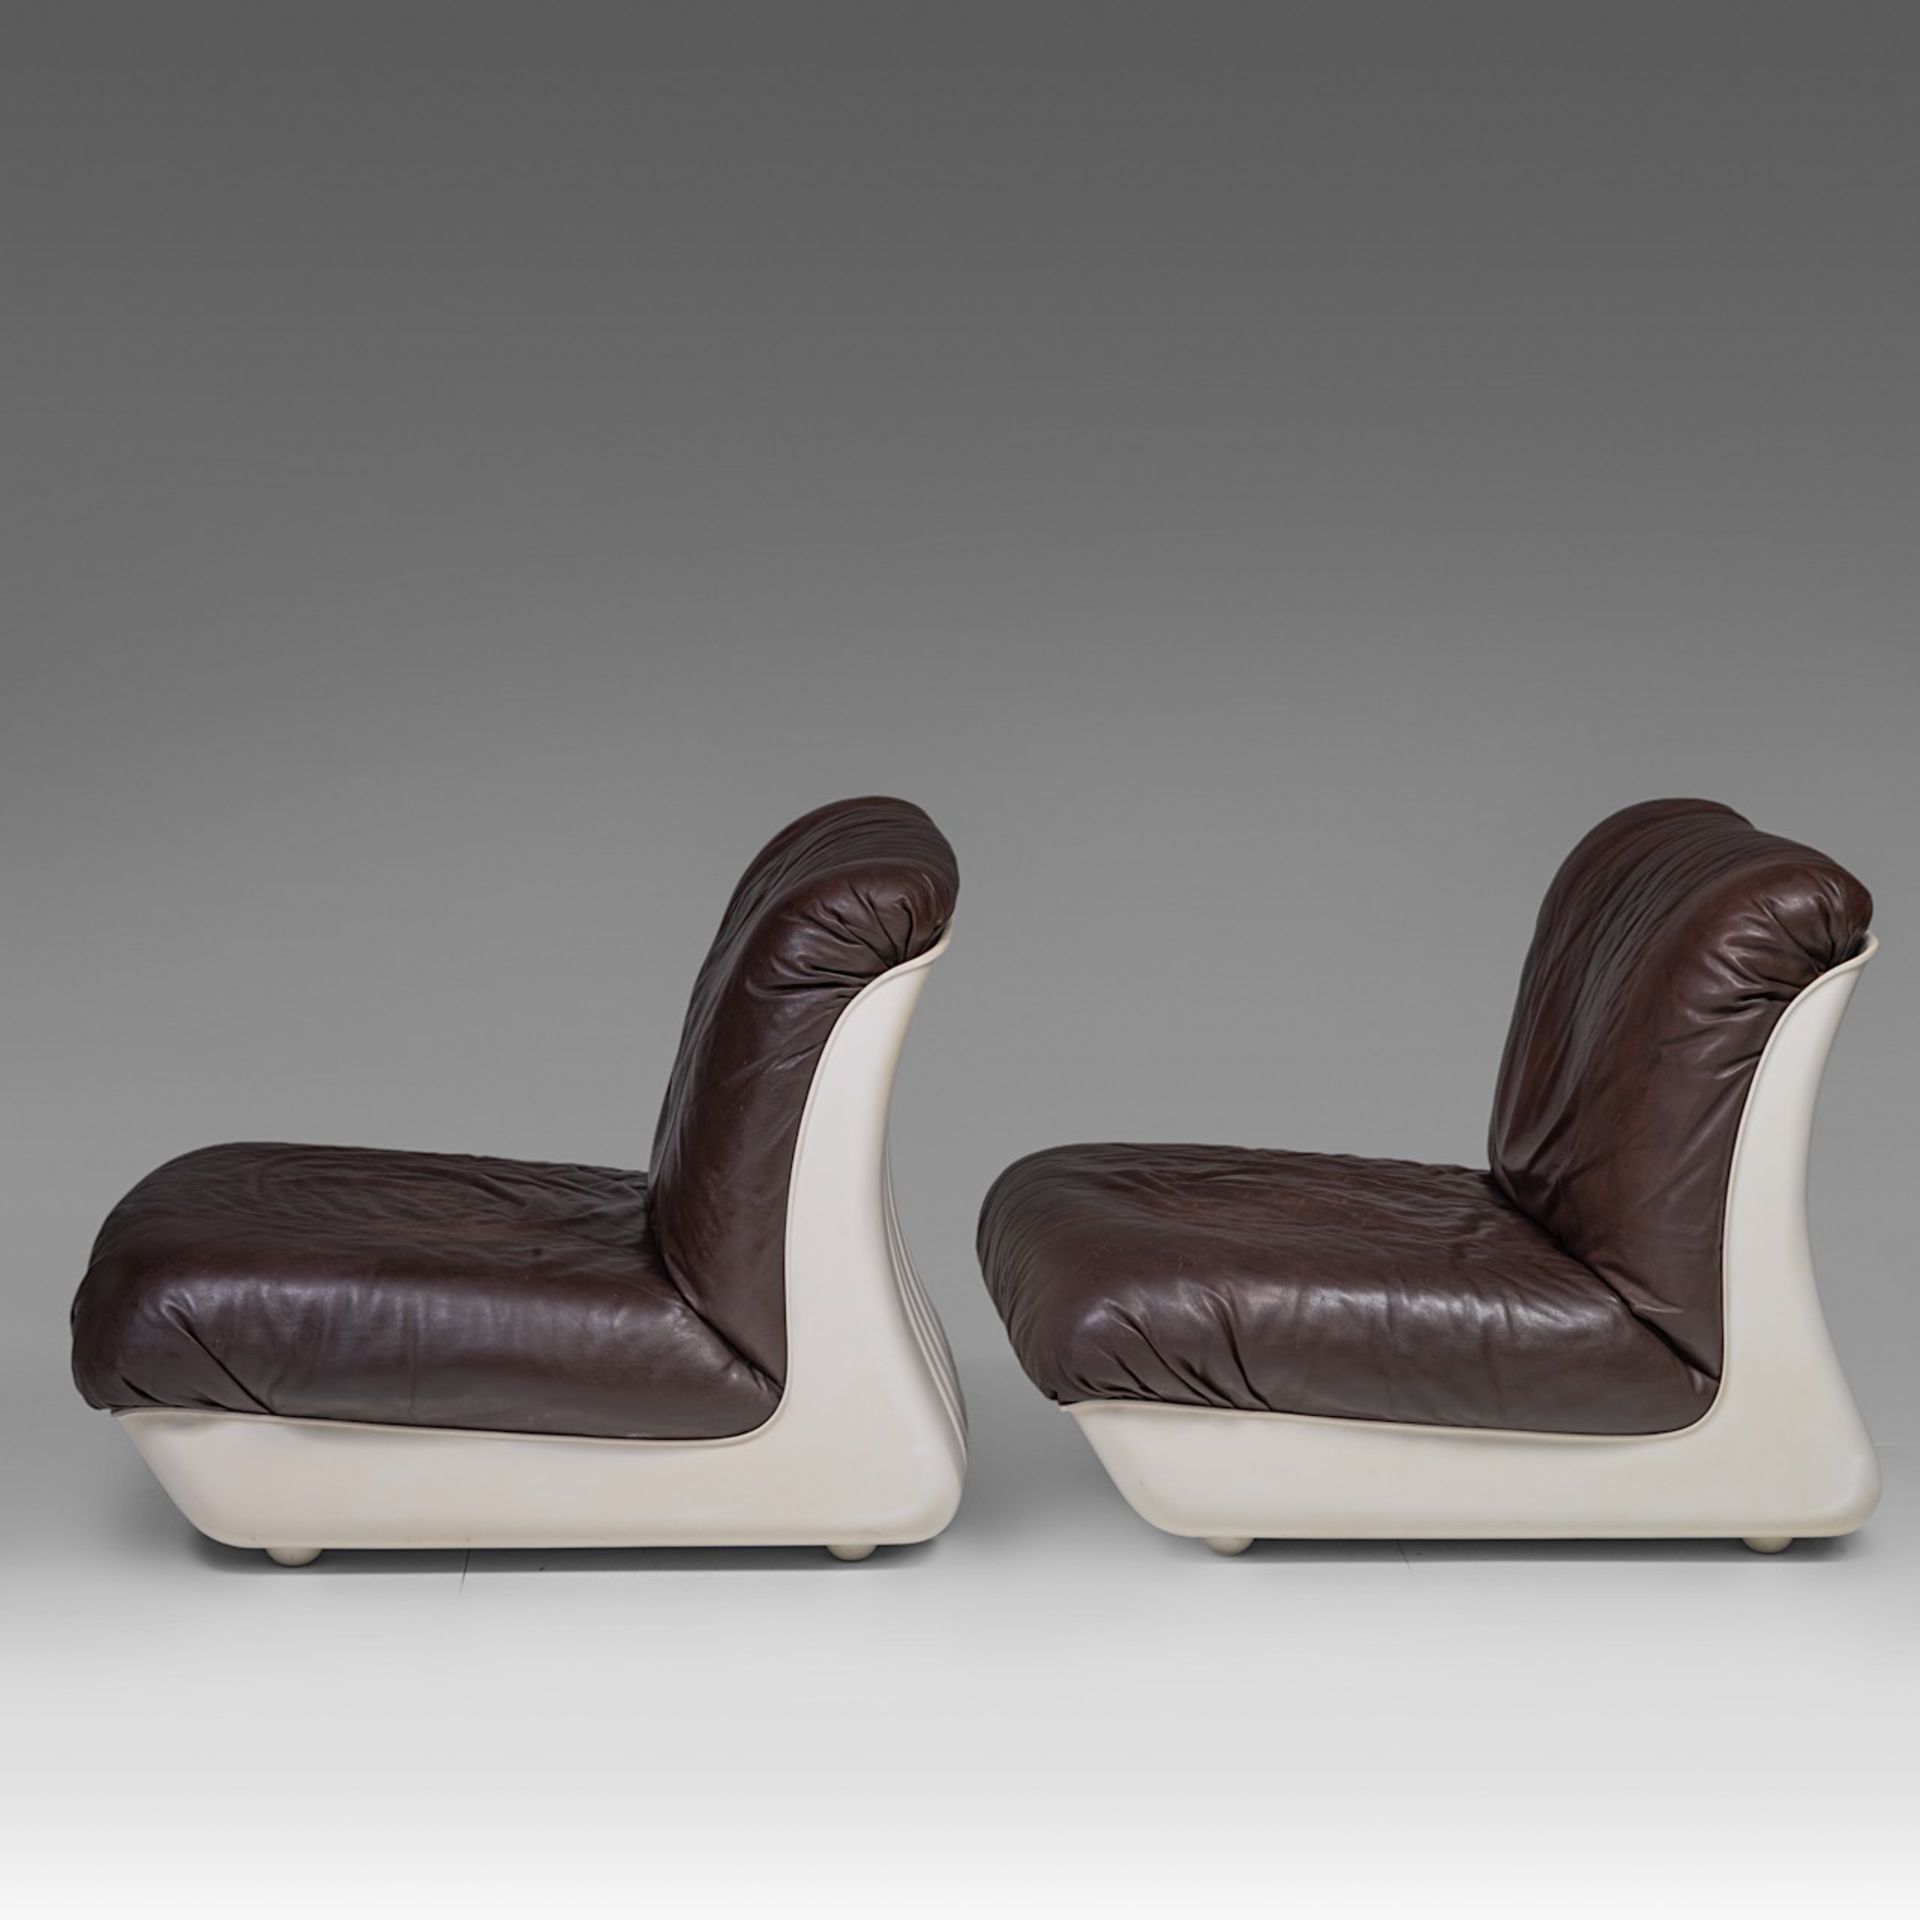 A vintage pair of loacoda chairs by Waldmann, Golz en Schmidt, made by Durlet, Belgium 1972, H 73 - - Image 5 of 12